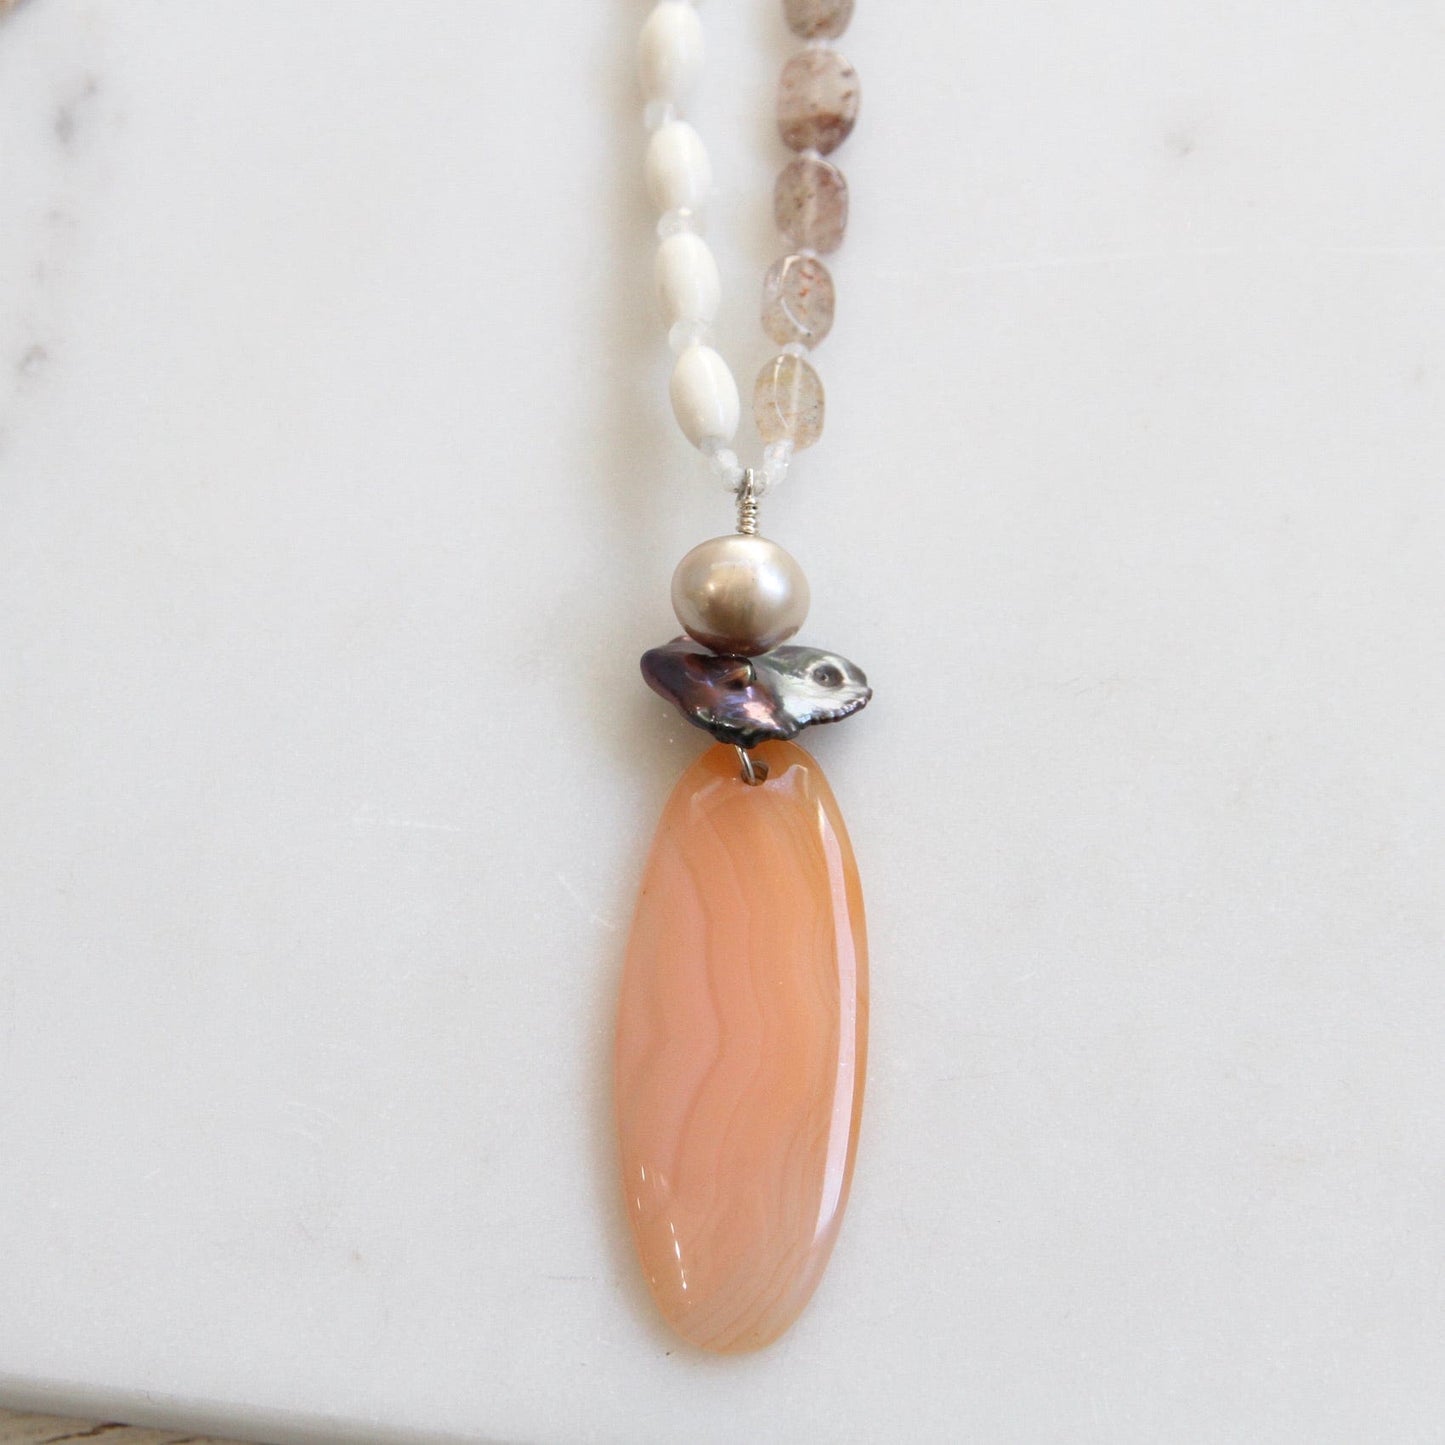 NKL Agate & Bone Necklace with Pearl & Carnelian Pendant